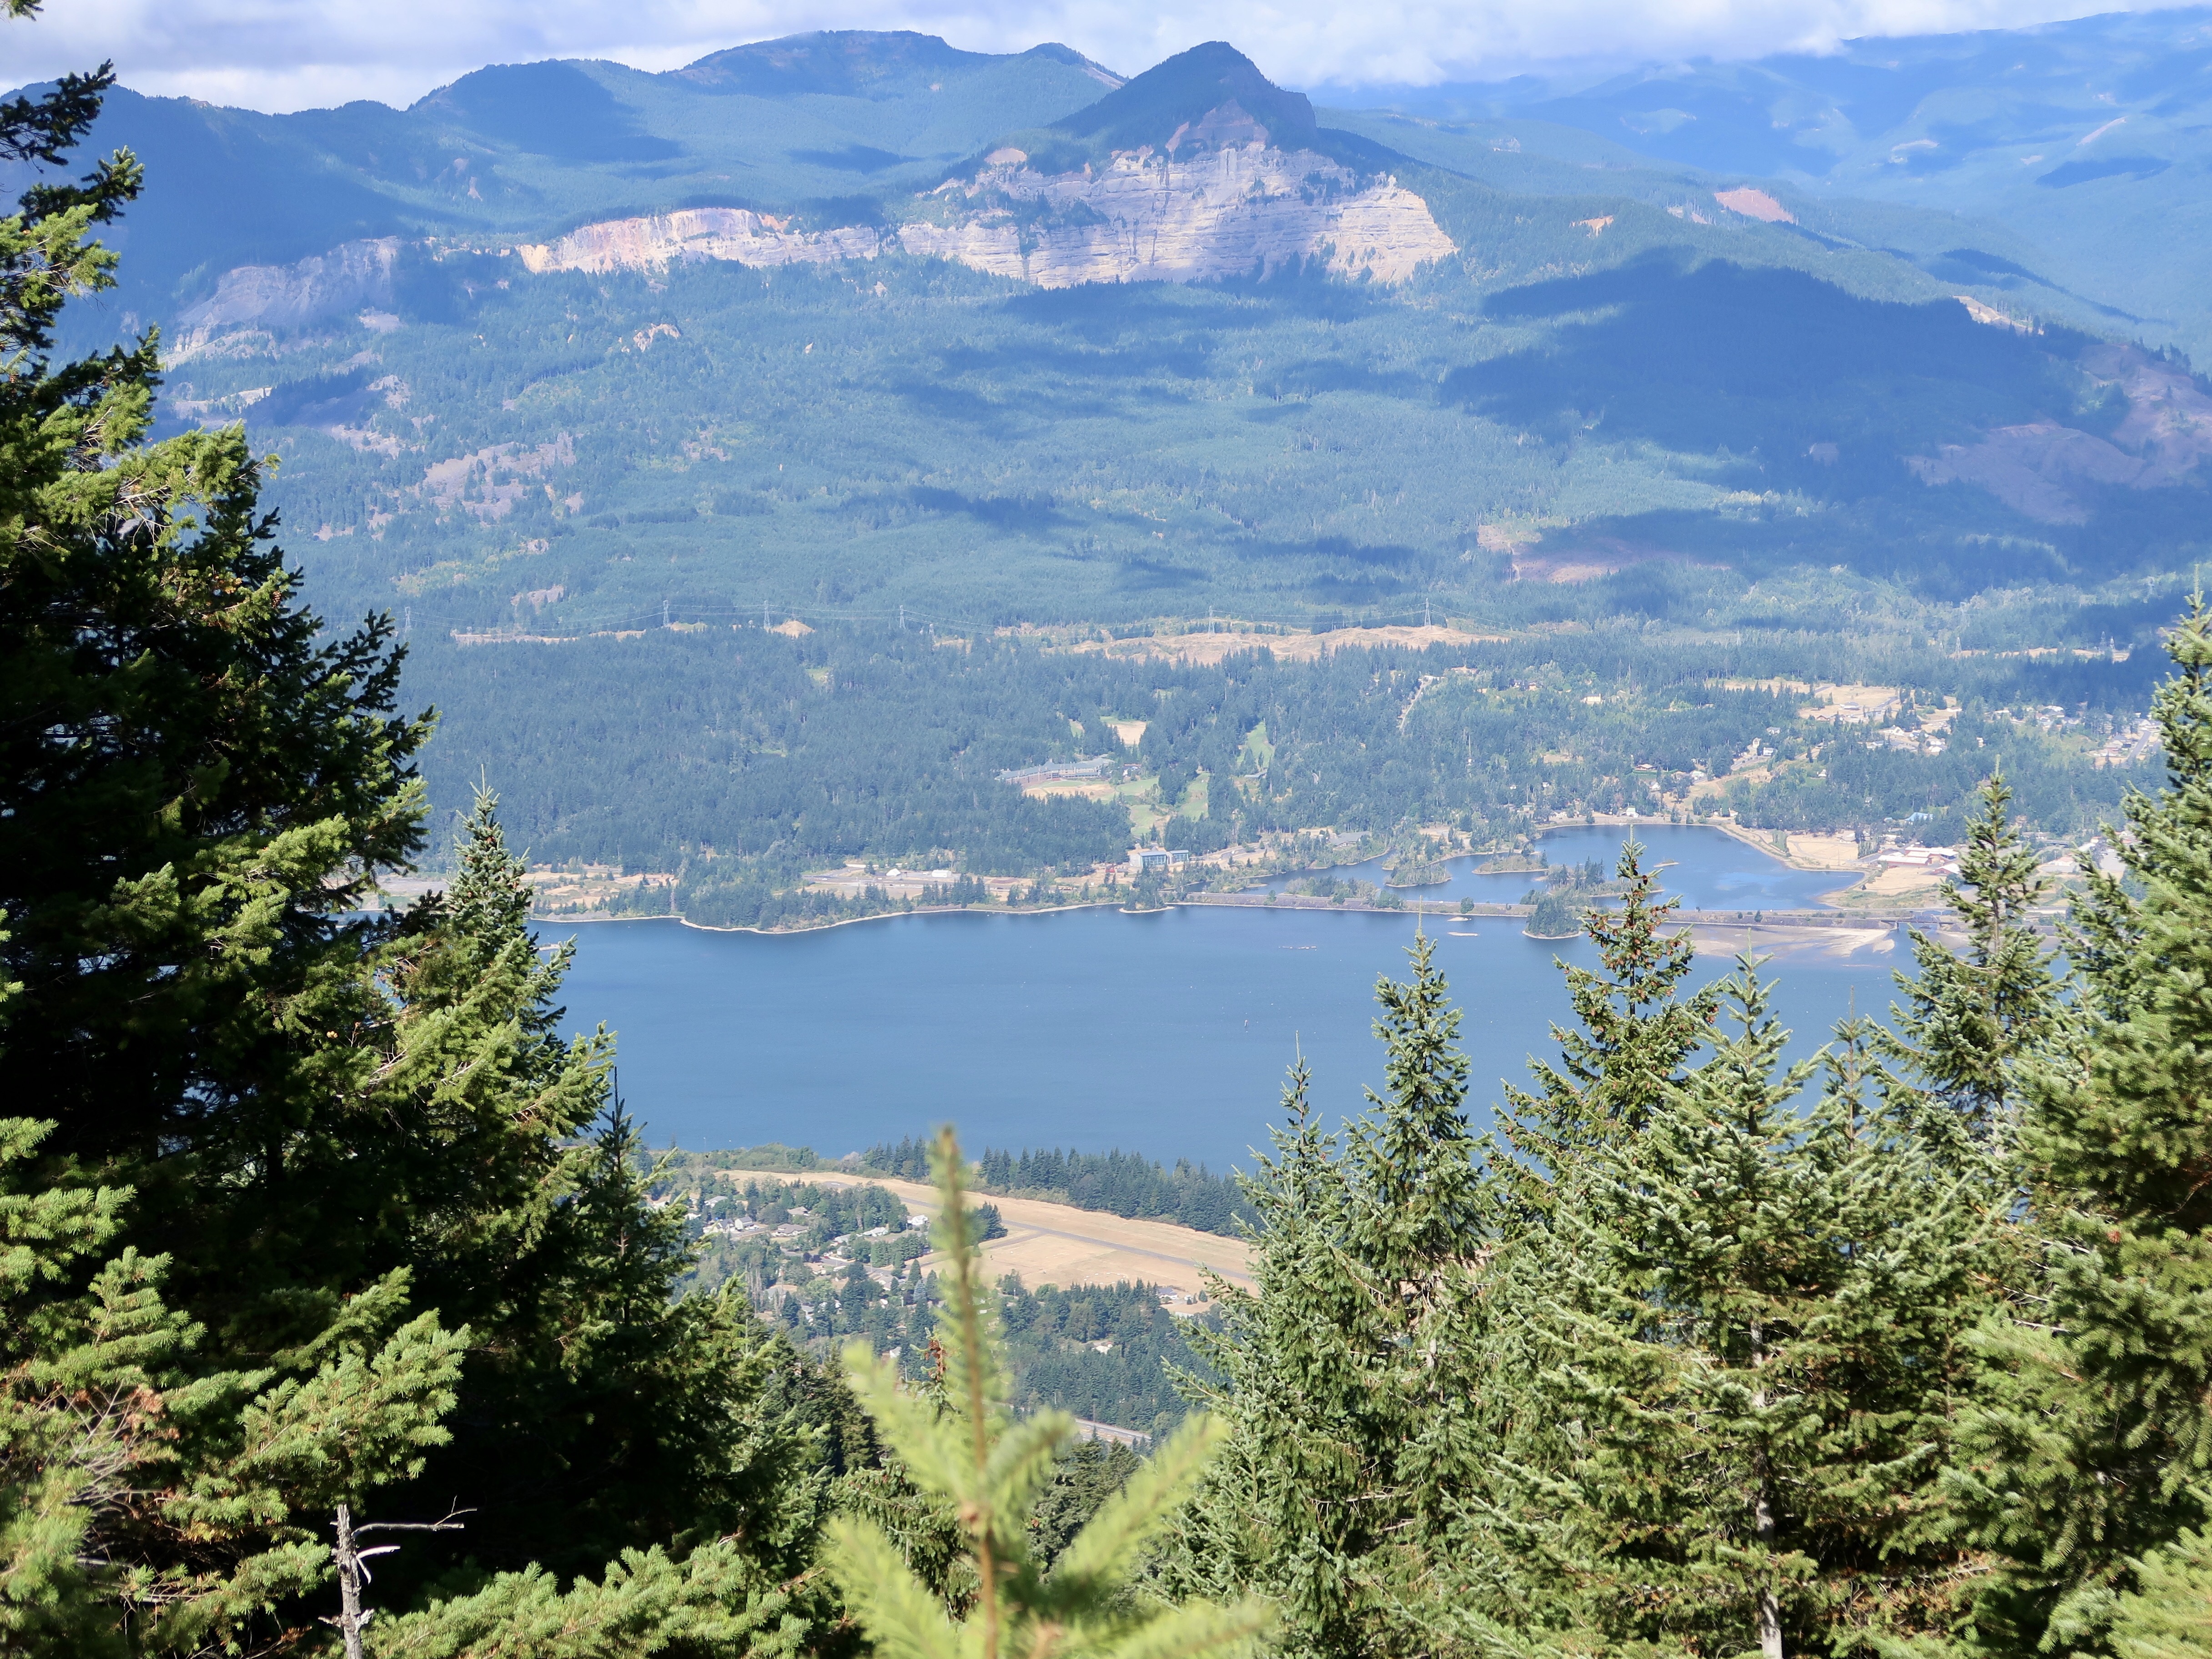 PCT Day 140 – Behold the Mighty Columbia River!